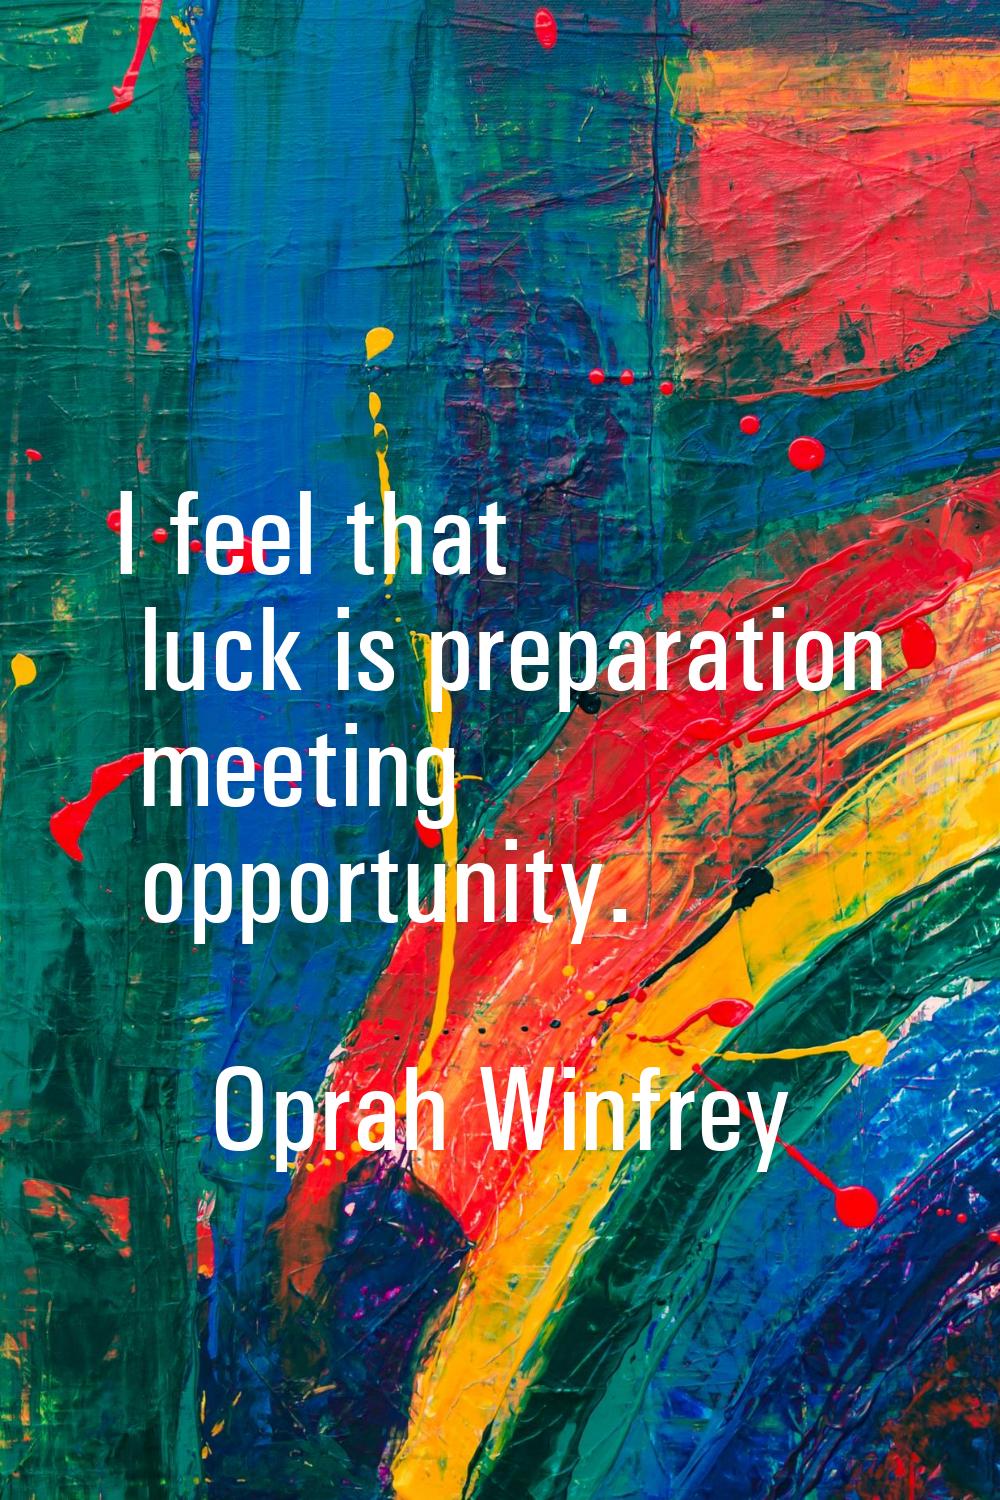 I feel that luck is preparation meeting opportunity.